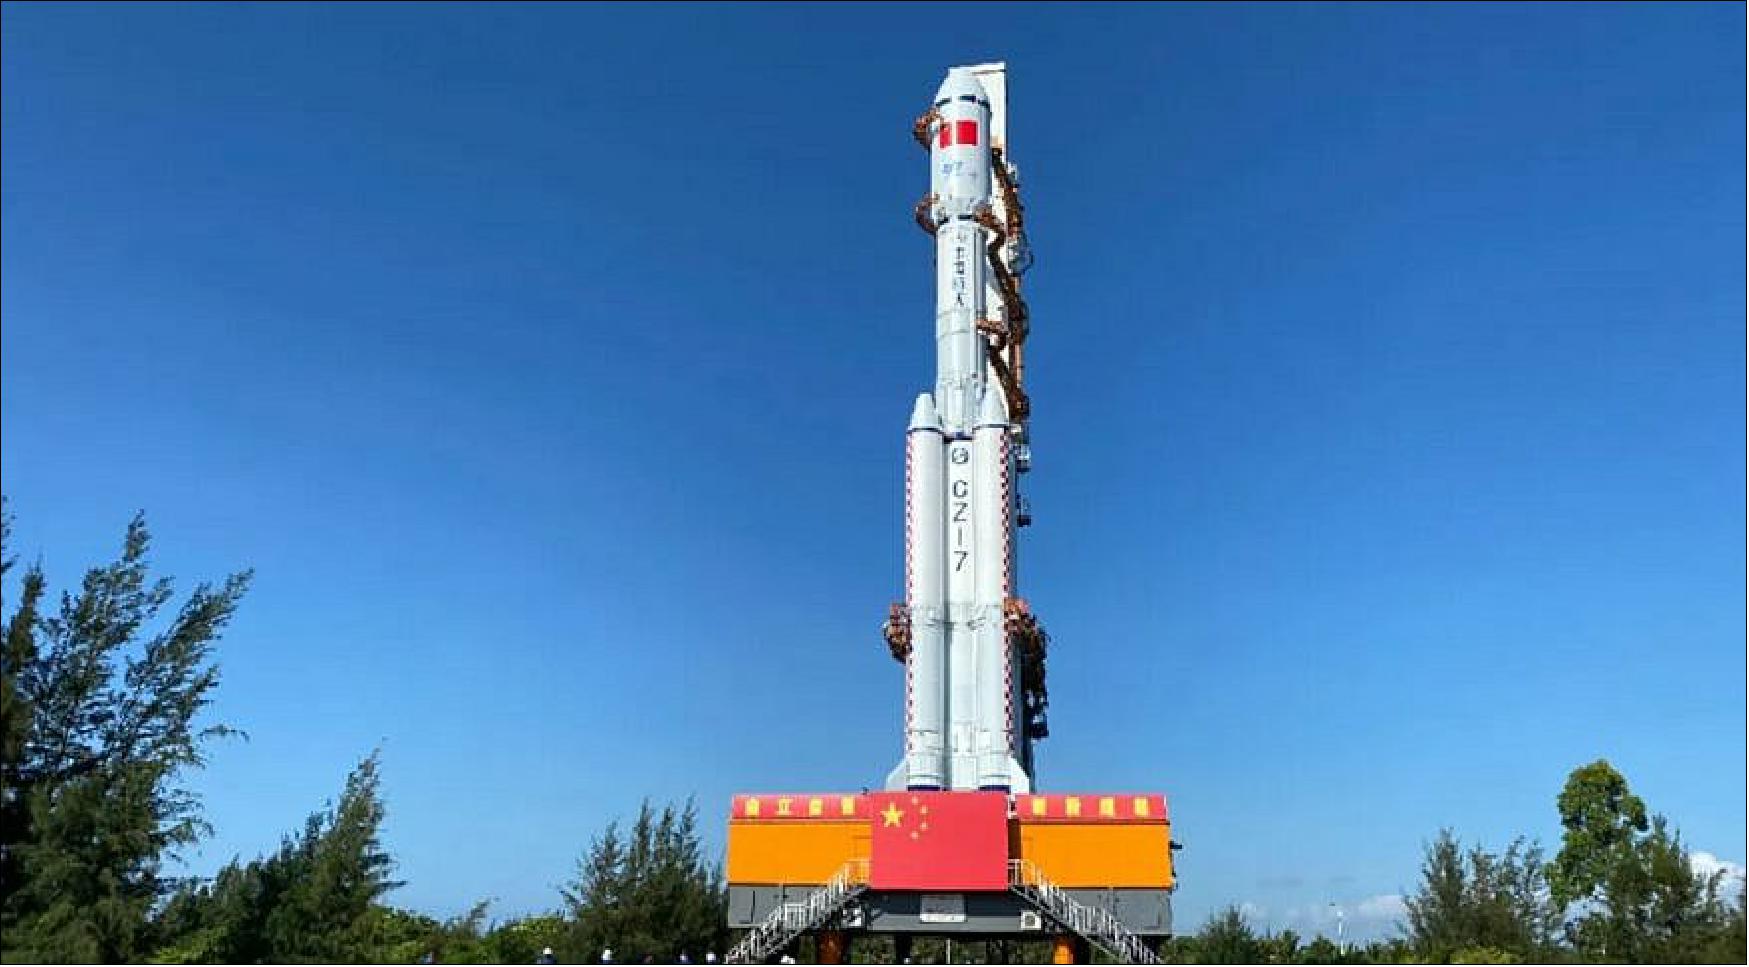 Figure 45: Rollout of the third Long March 7 rocket carrying the Tianzhou-2 spacecraft at the Wenchang launch site (image credit: CMSA)